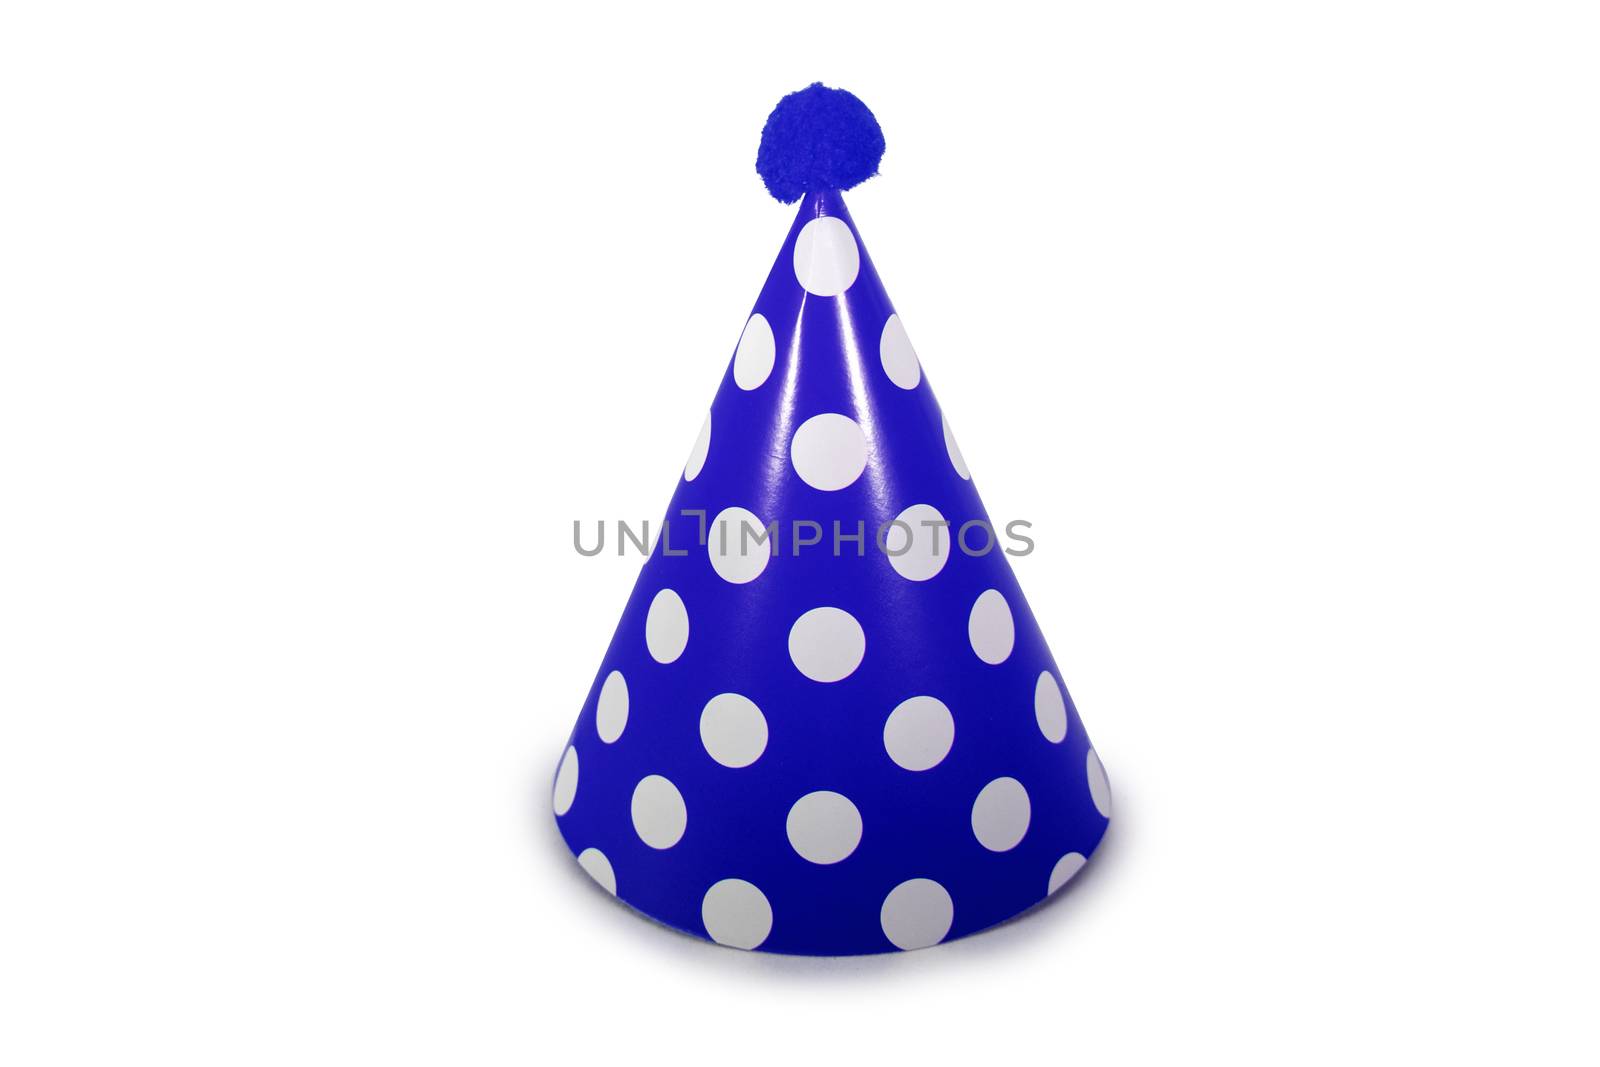 A Blue Birthday Hat on a Pure White Background by bju12290